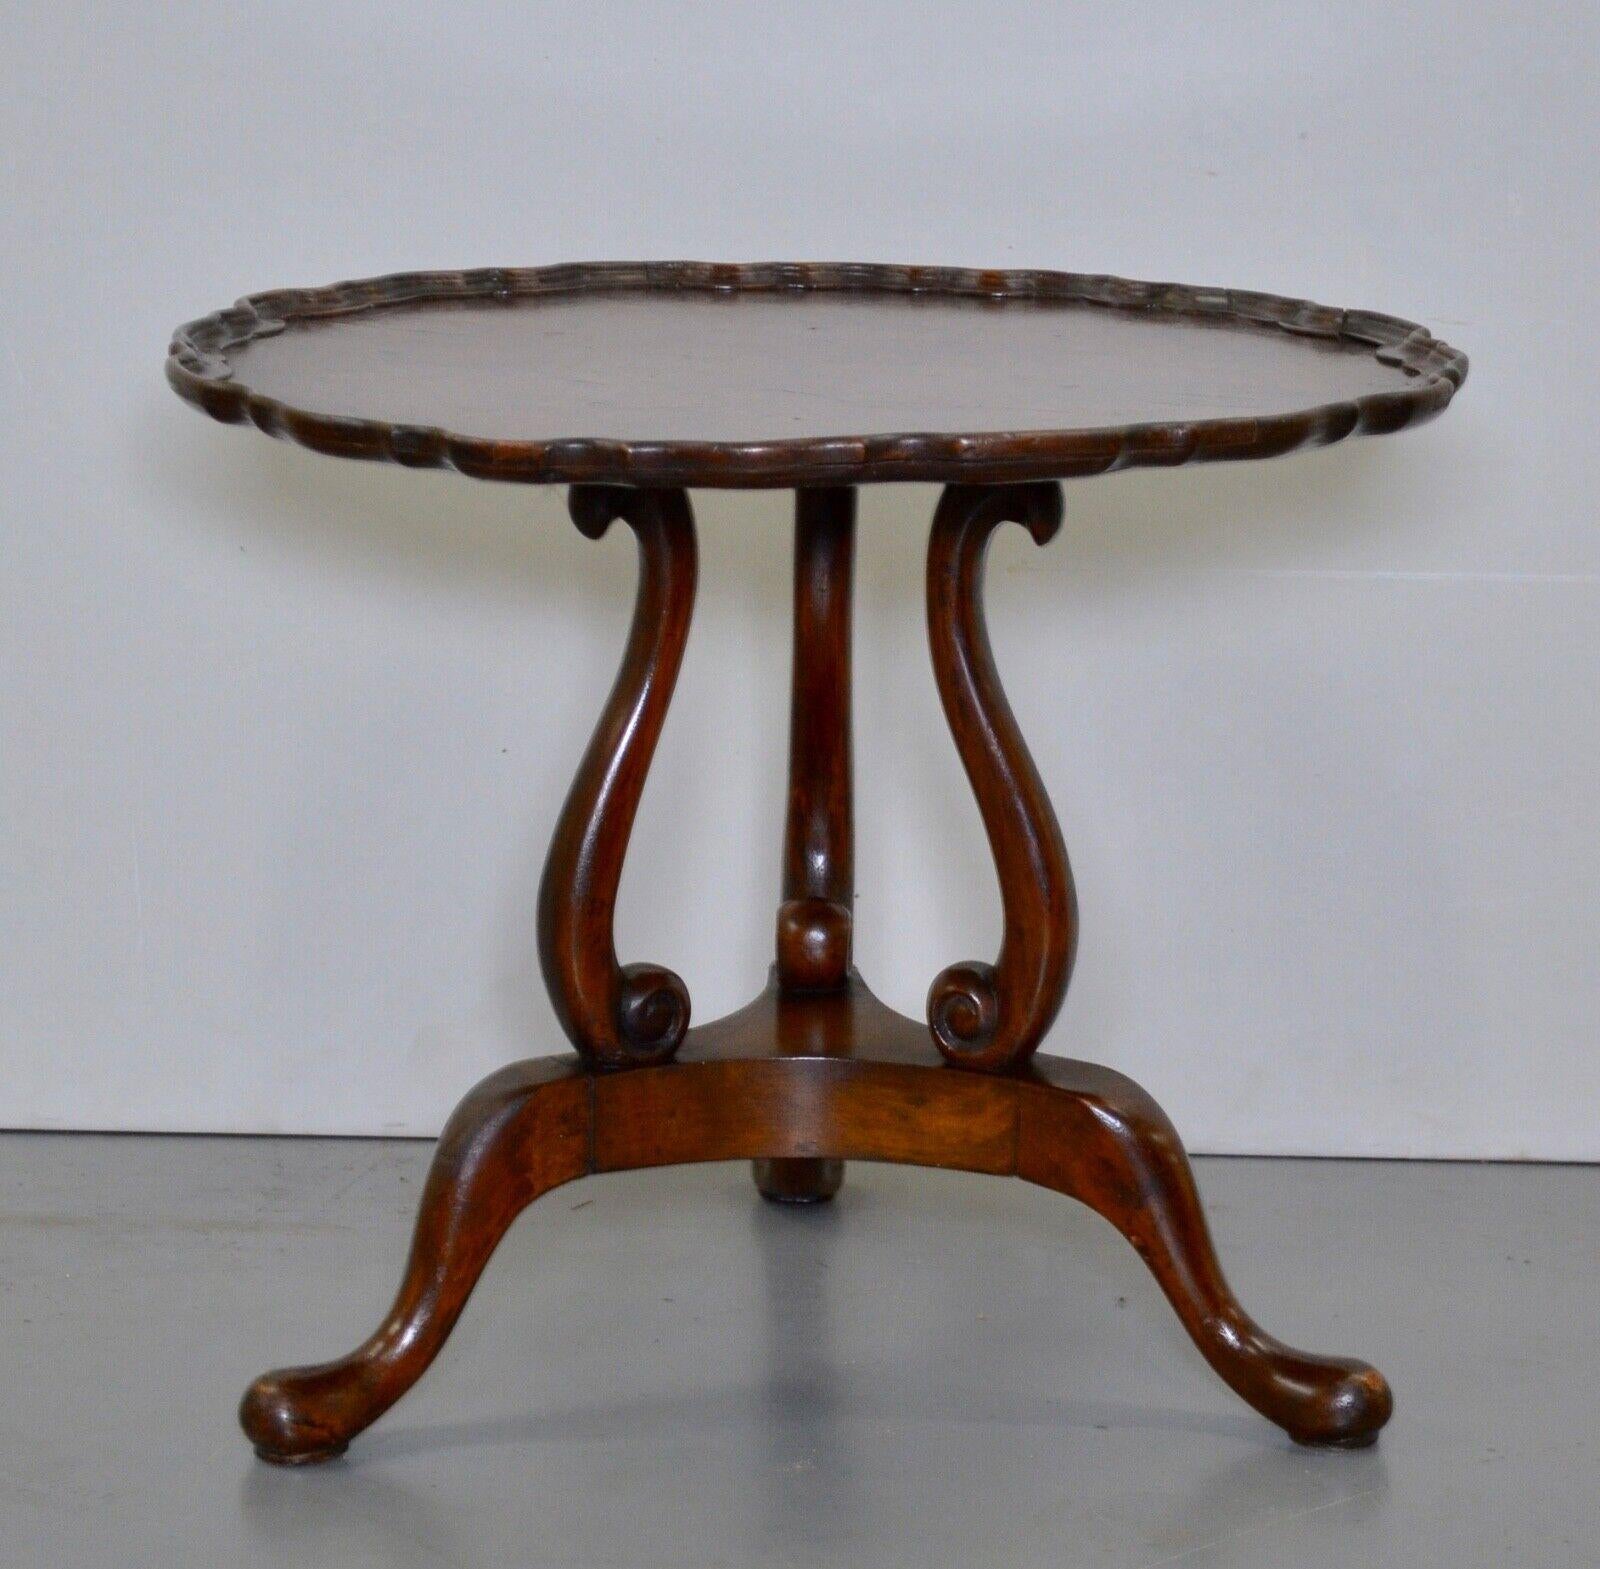 English GEORGIAN REVIVIAL BURR-WALNUT OCCASiONAL COFFEE LAMP TABLE For Sale